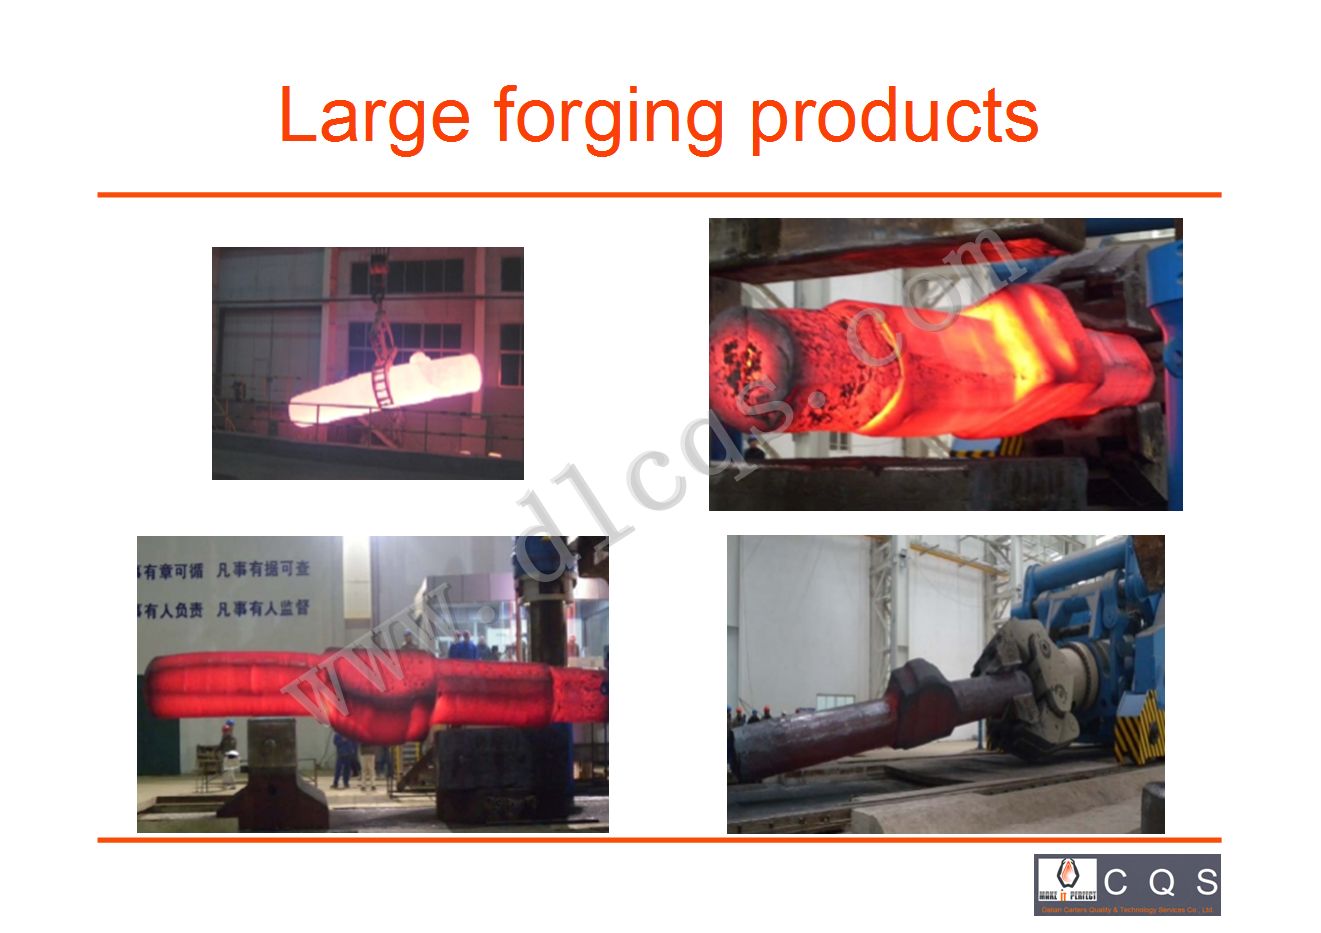 LARGE FORGING PRODUCTS